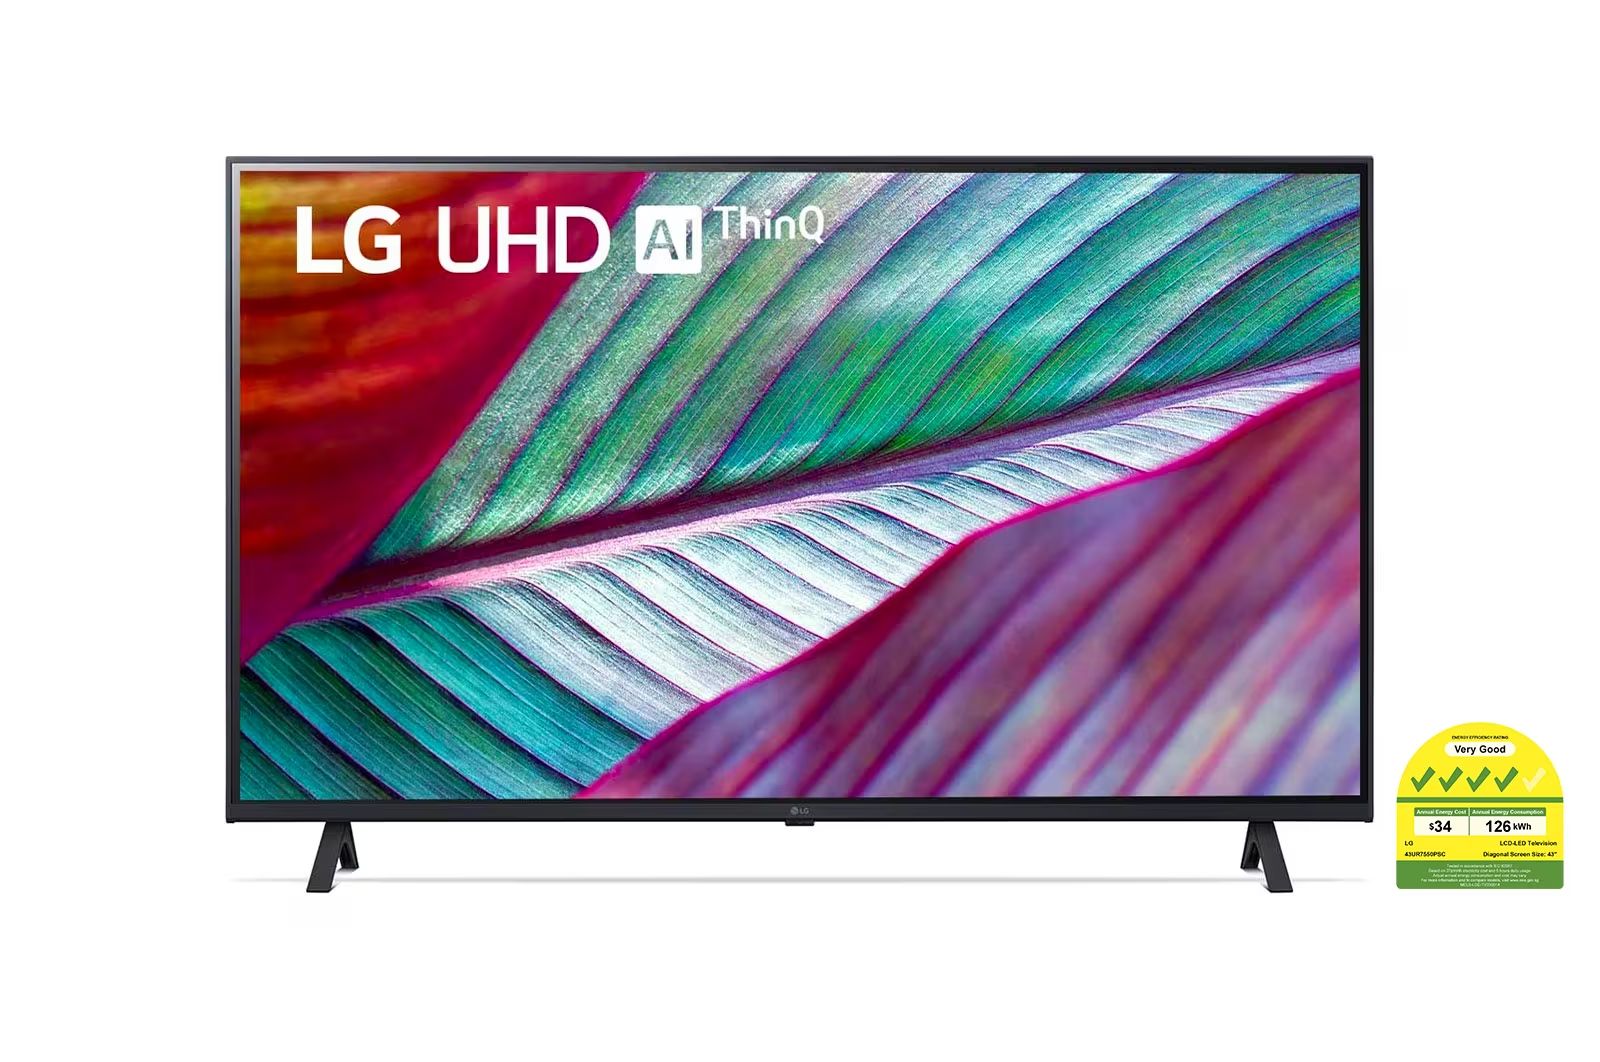 What Sizes Are Available In The 4K Ultra HD Smart LED TV?